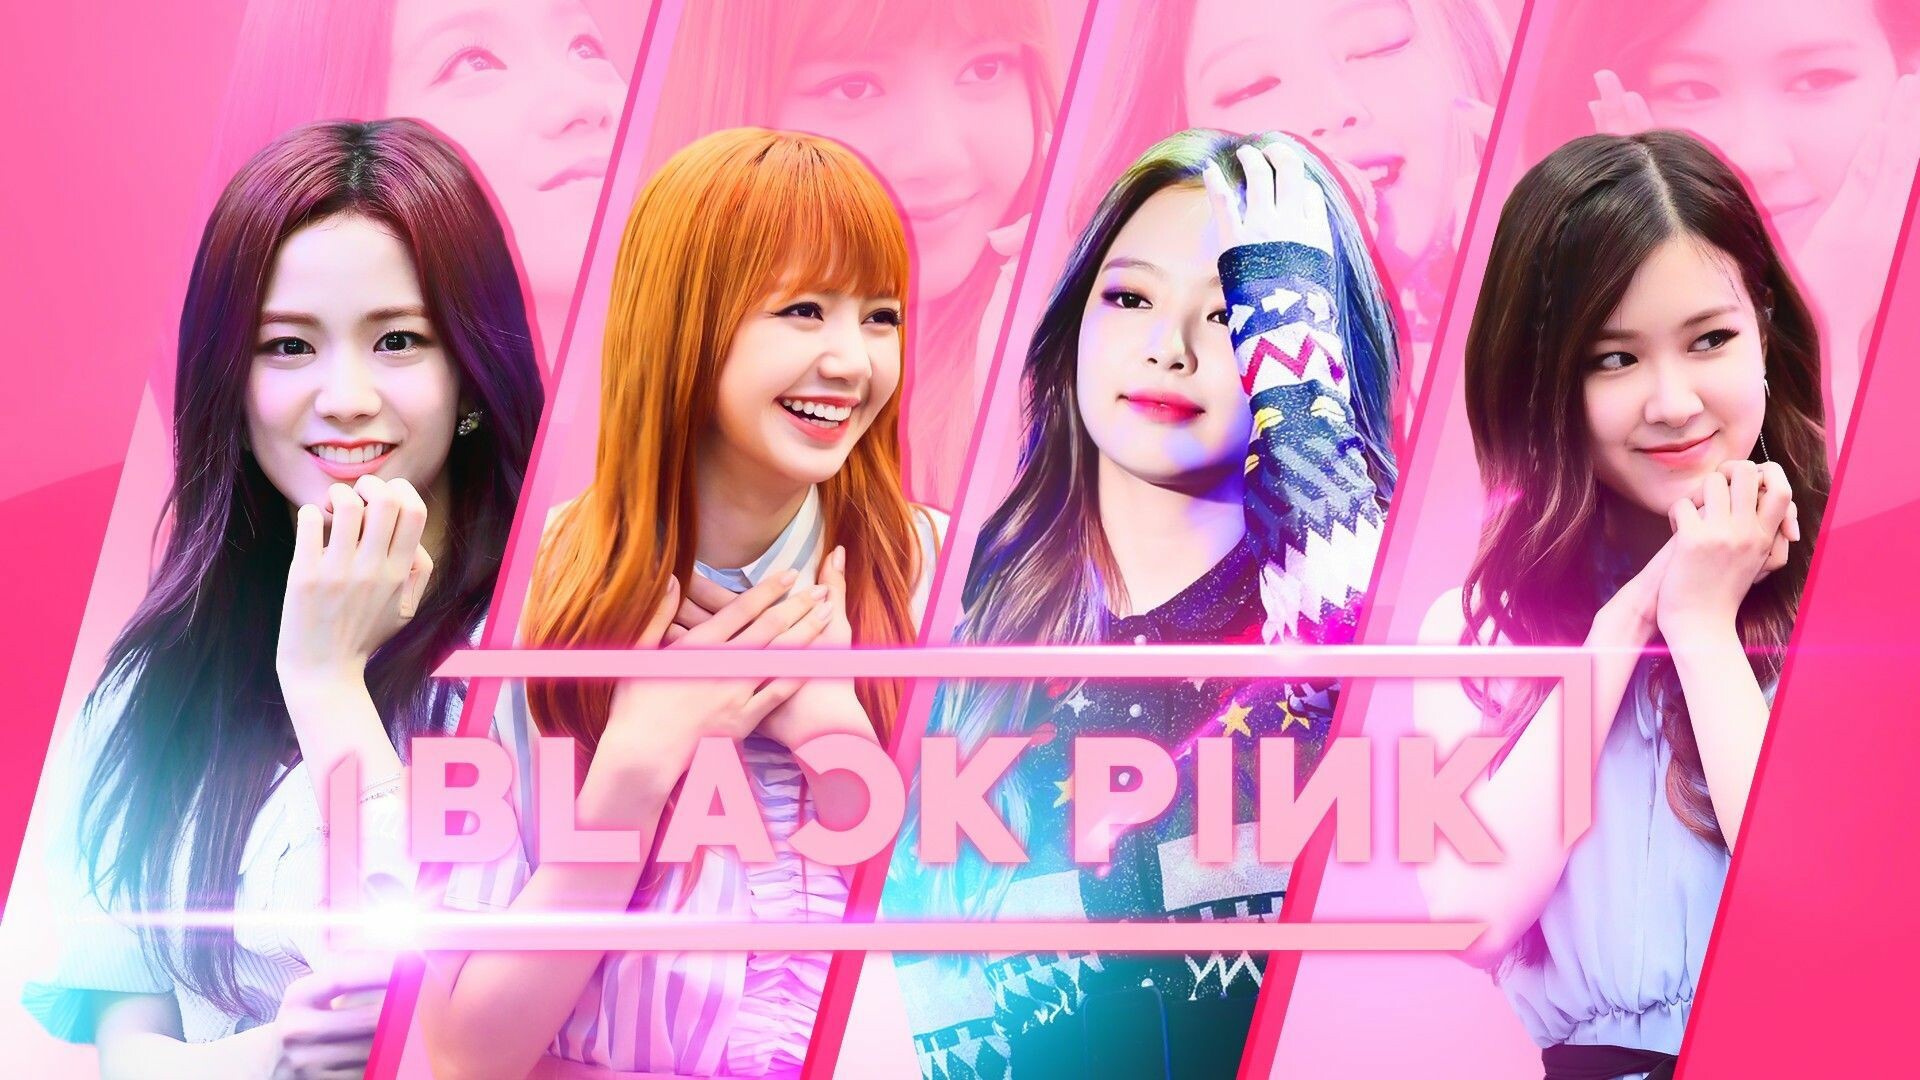 BLACKPINK: "Playing with Fire" reached number one on the Billboard World Digital Song Sales chart. 1920x1080 Full HD Background.